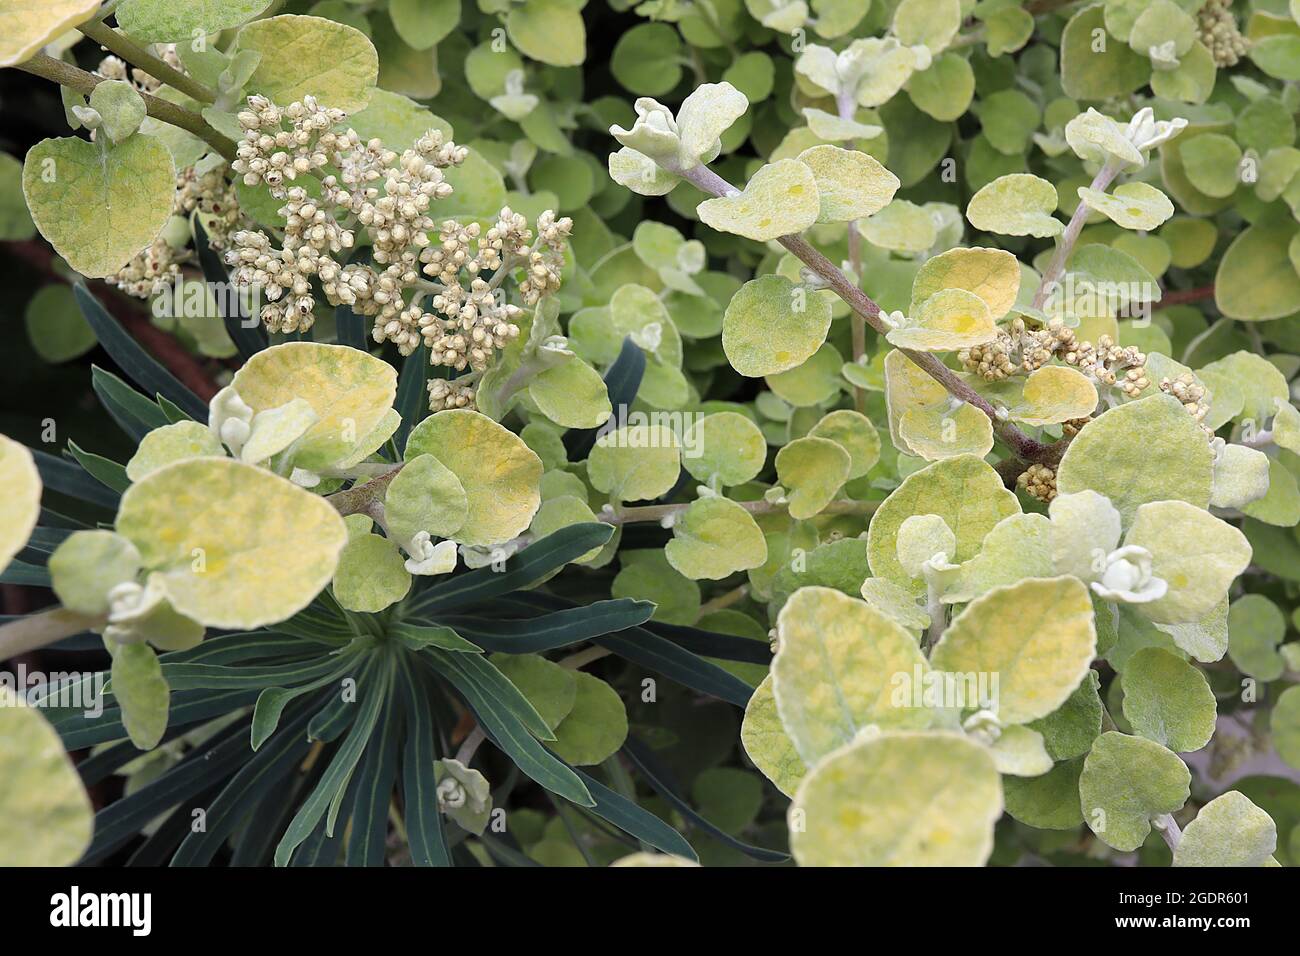 Helichrysum petiolare ‘Limelight’ liquorice plant Limelight – flower bud clusters and small round yellow green leaves on thick stems,  July, England, Stock Photo